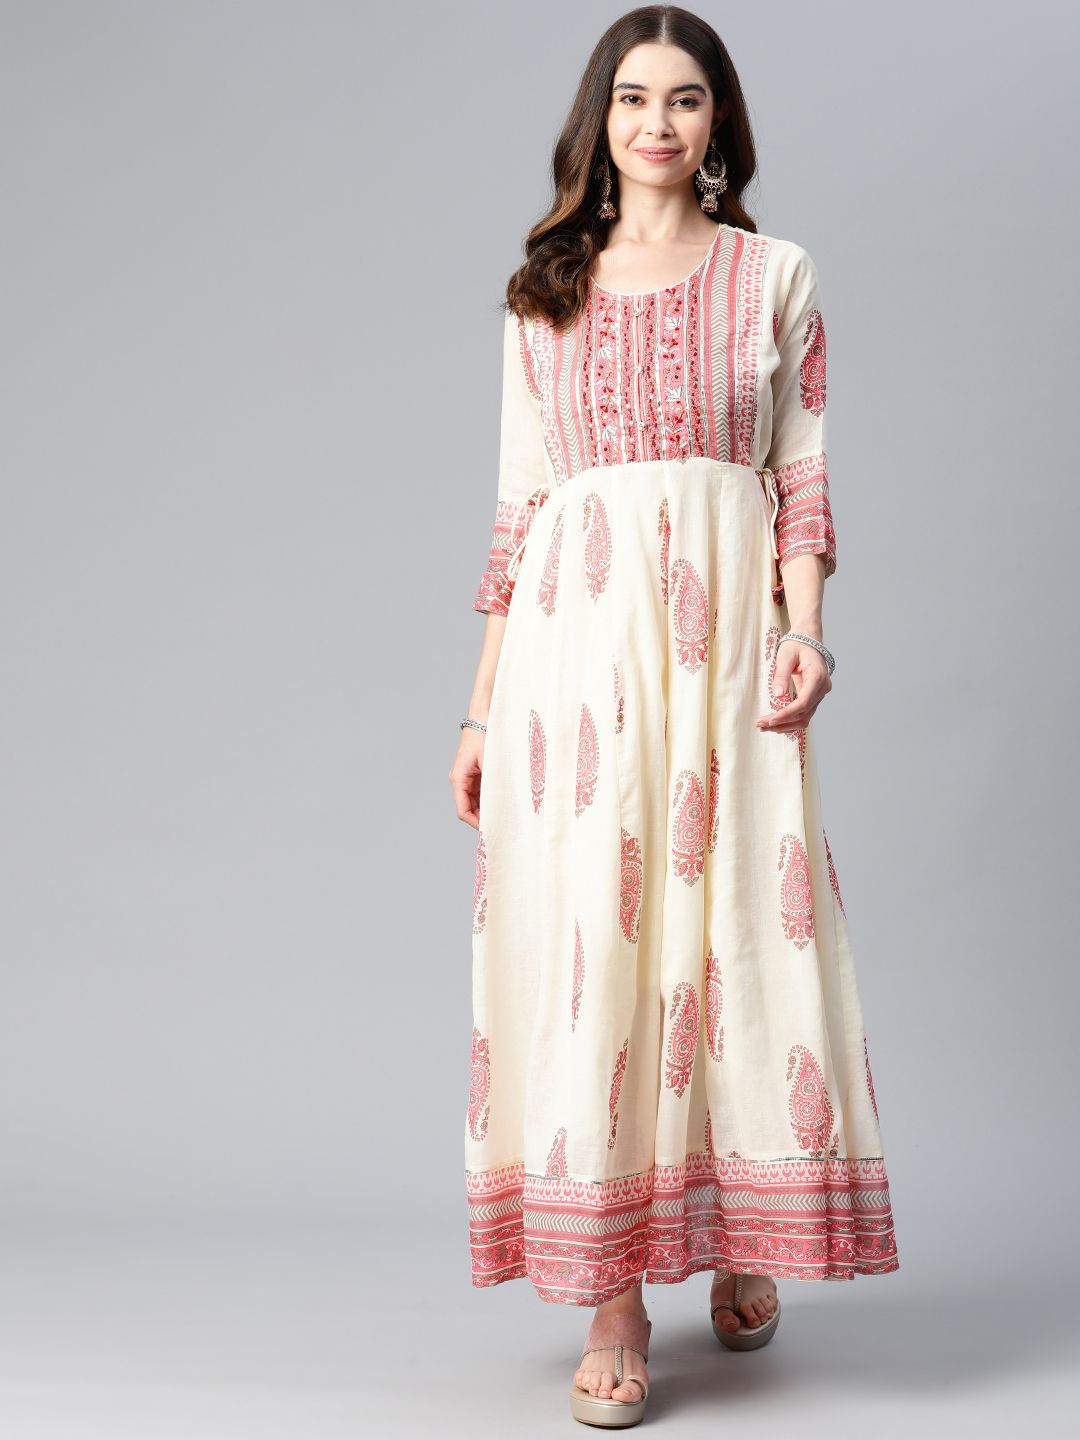 Readiprint Fashions Floral Cotton Maxi Dress Price in India